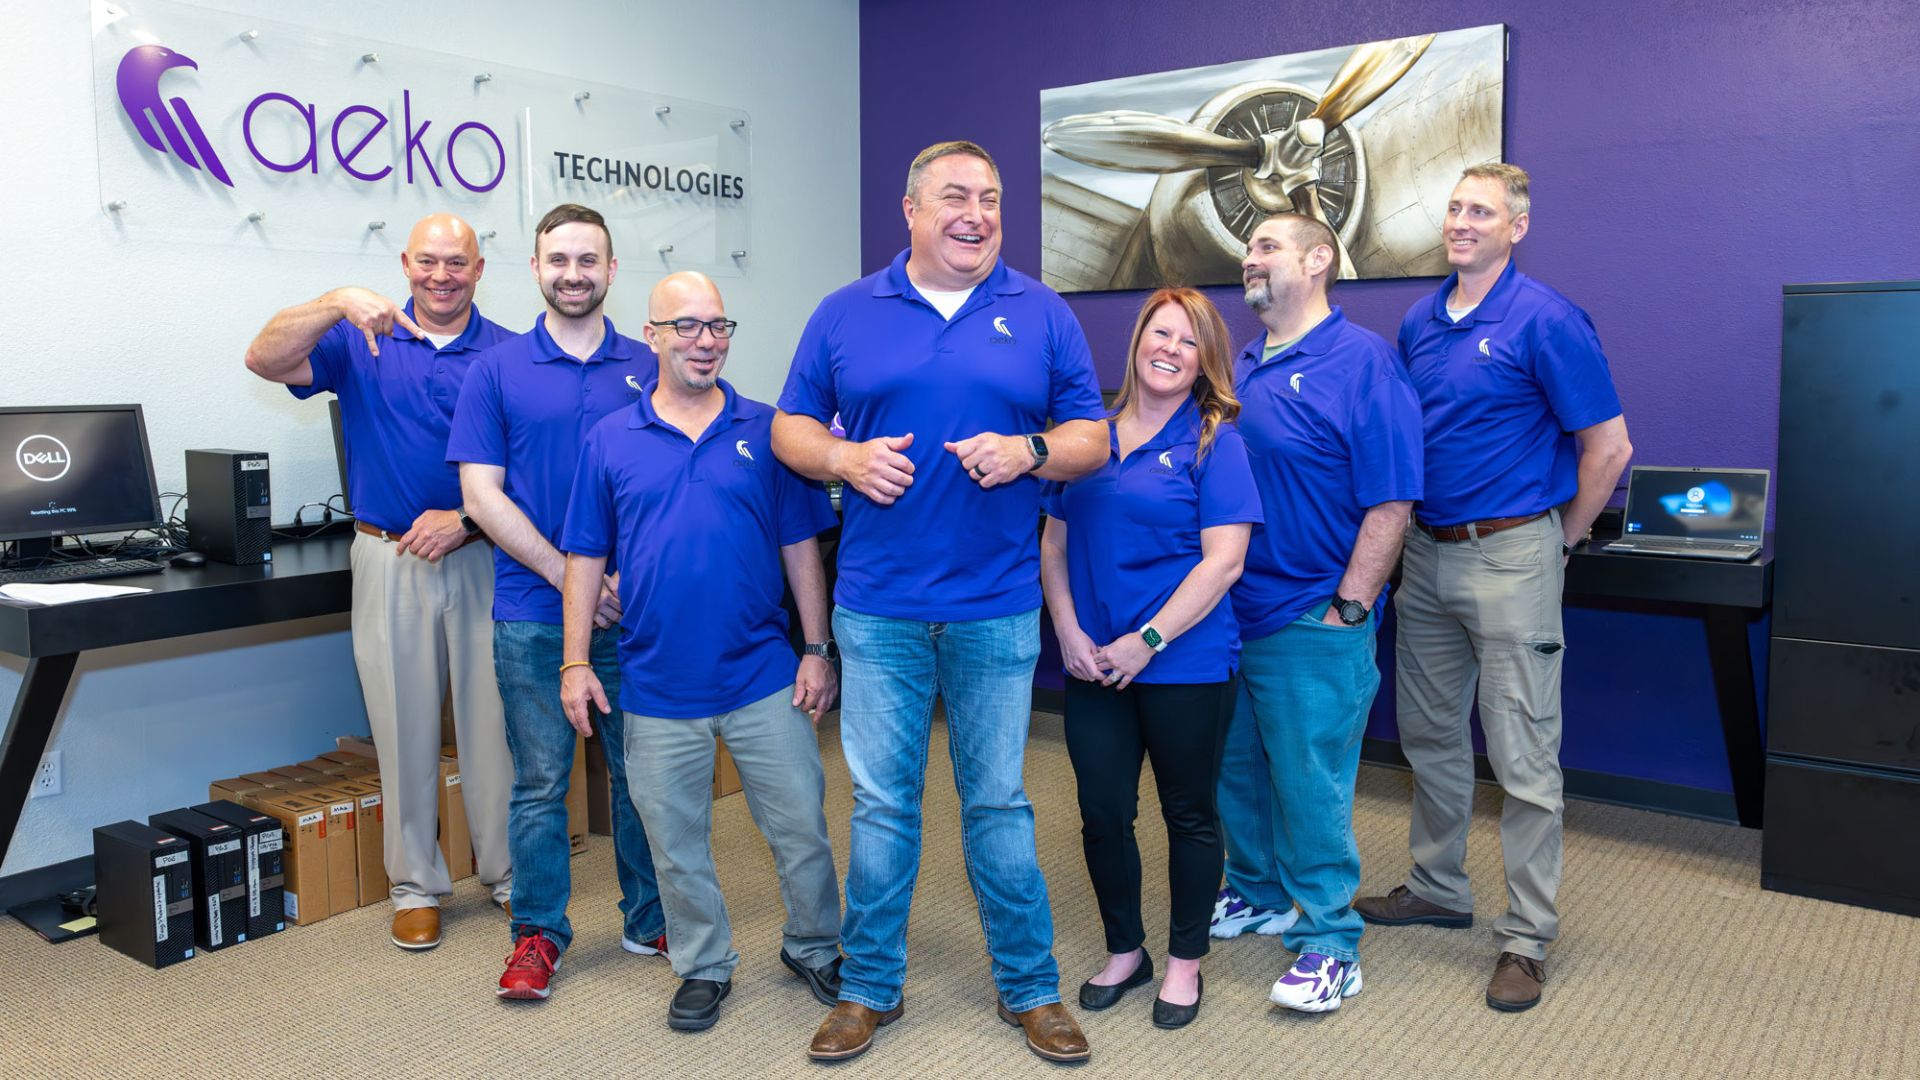 Your IT Support Team - Fun - Aeko Technologies